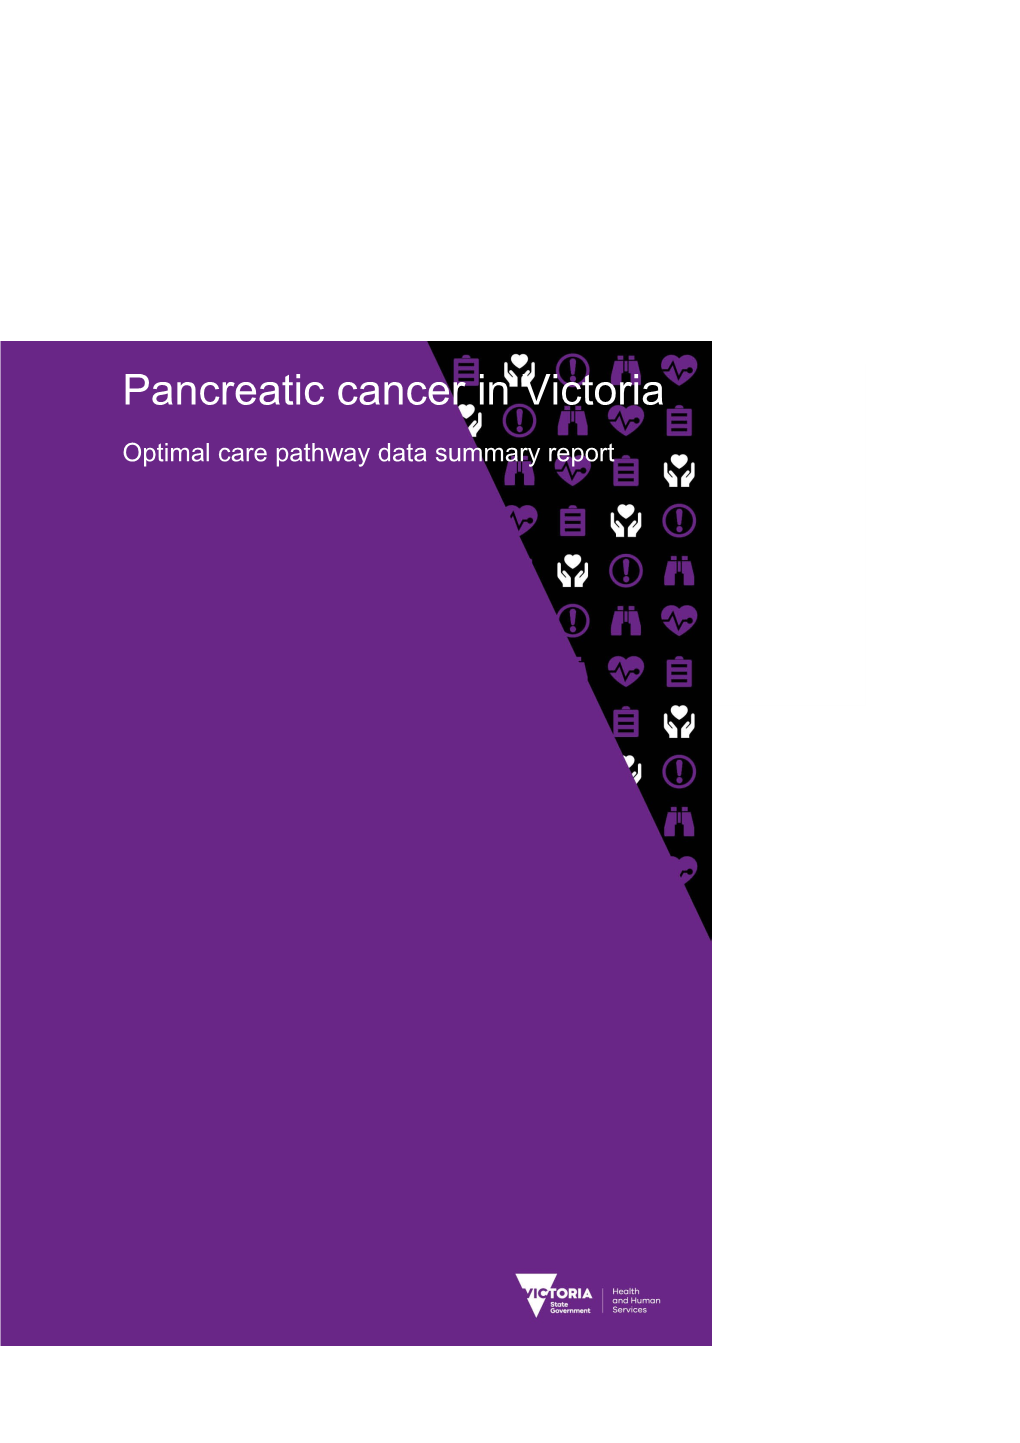 Pancreatic Cancer in Victoria: Optimal Care Pathway Data Summary Report